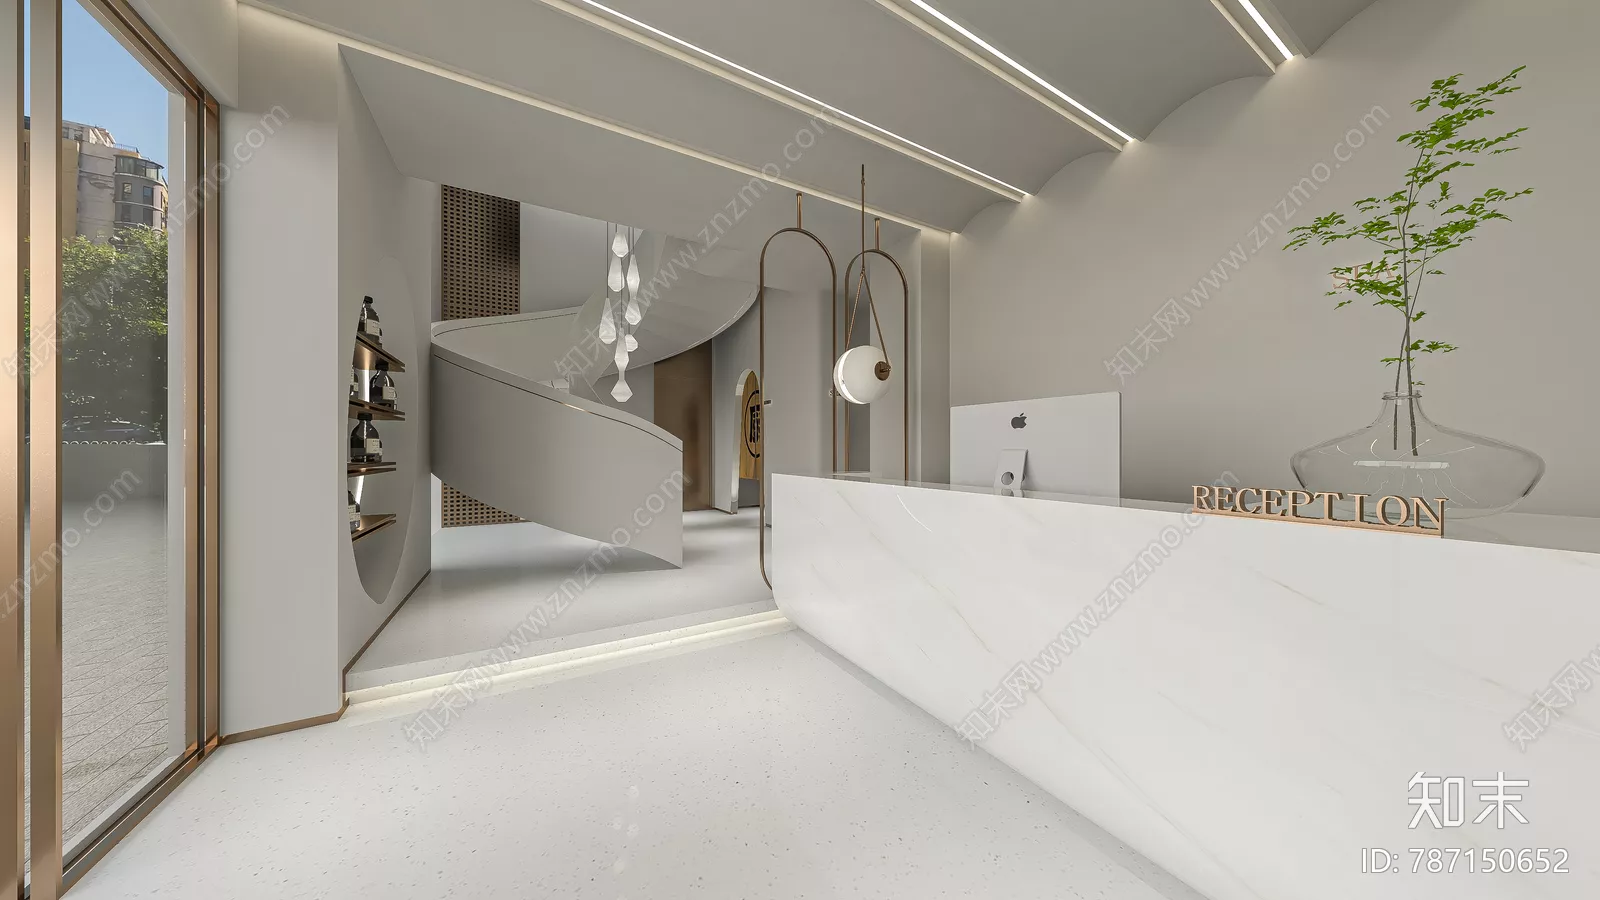 MODERN SPA AND BEAUTY - SKETCHUP 3D SCENE - VRAY OR ENSCAPE - ID14036